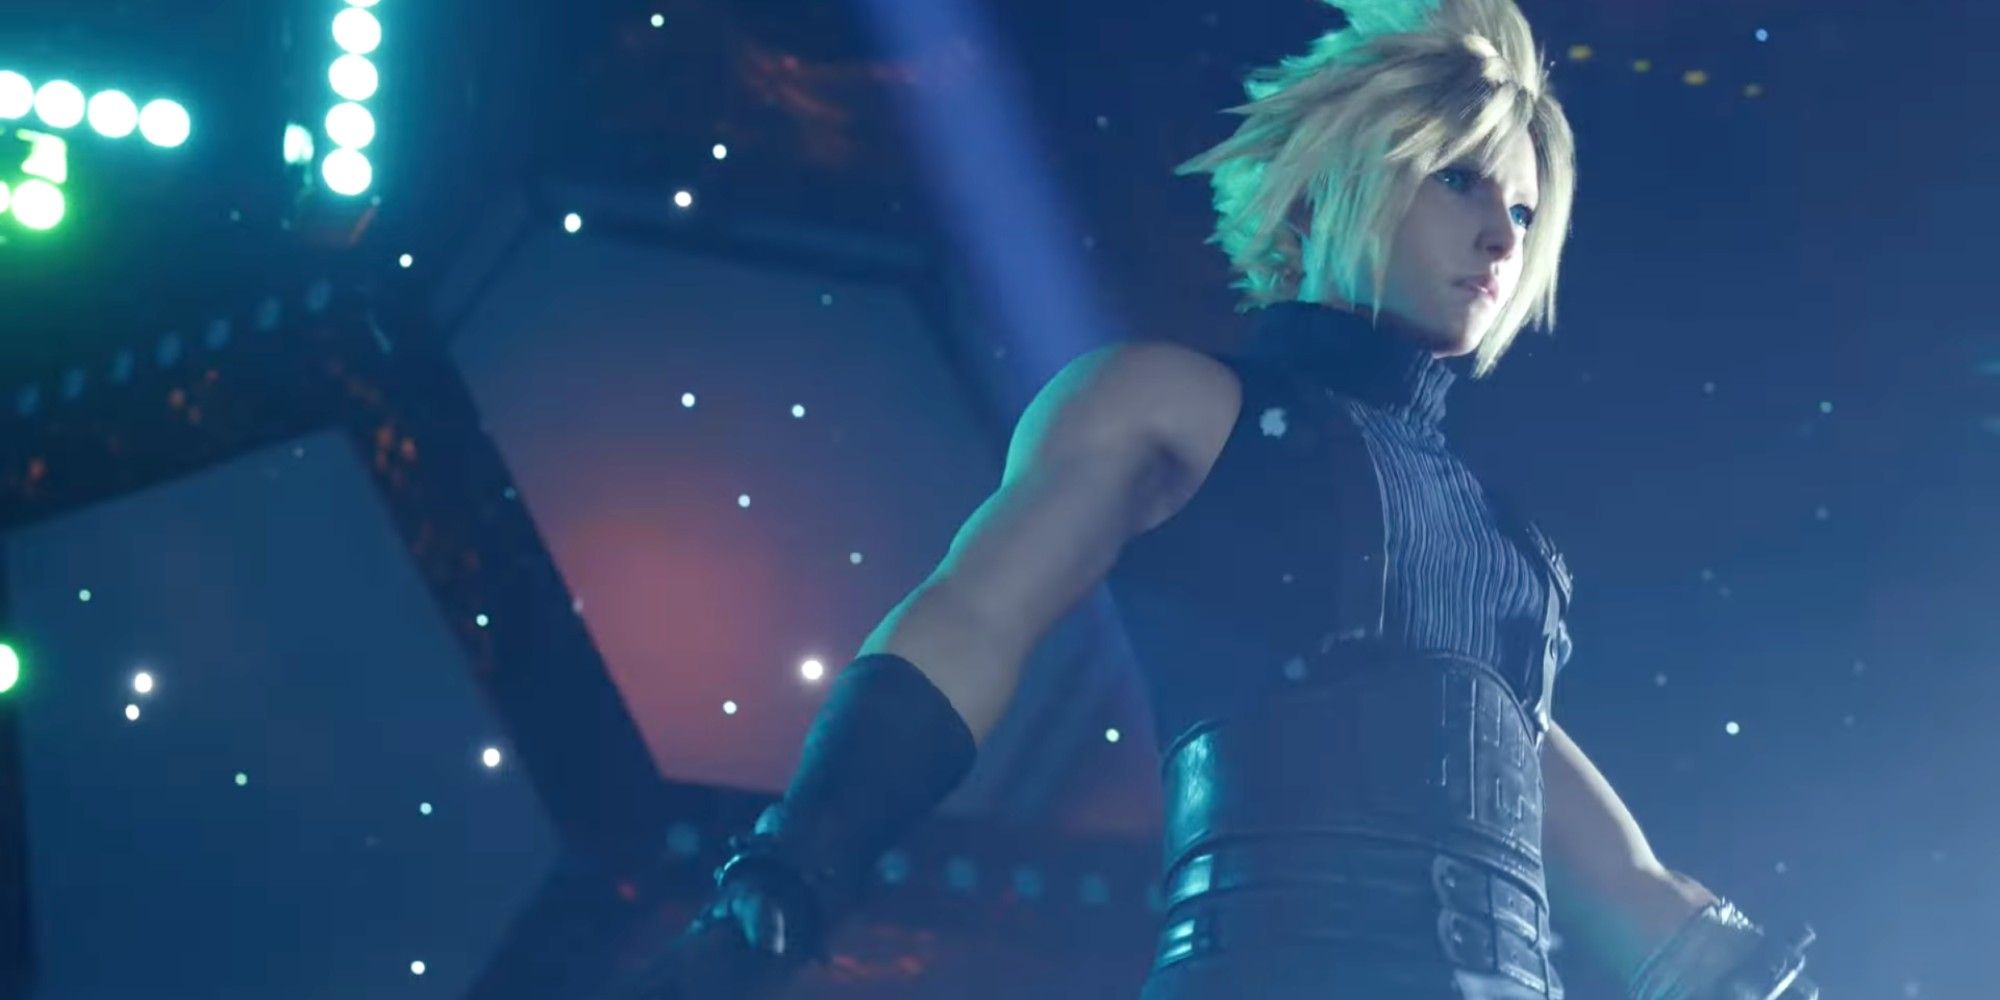 Cloud Strife dances for the audience